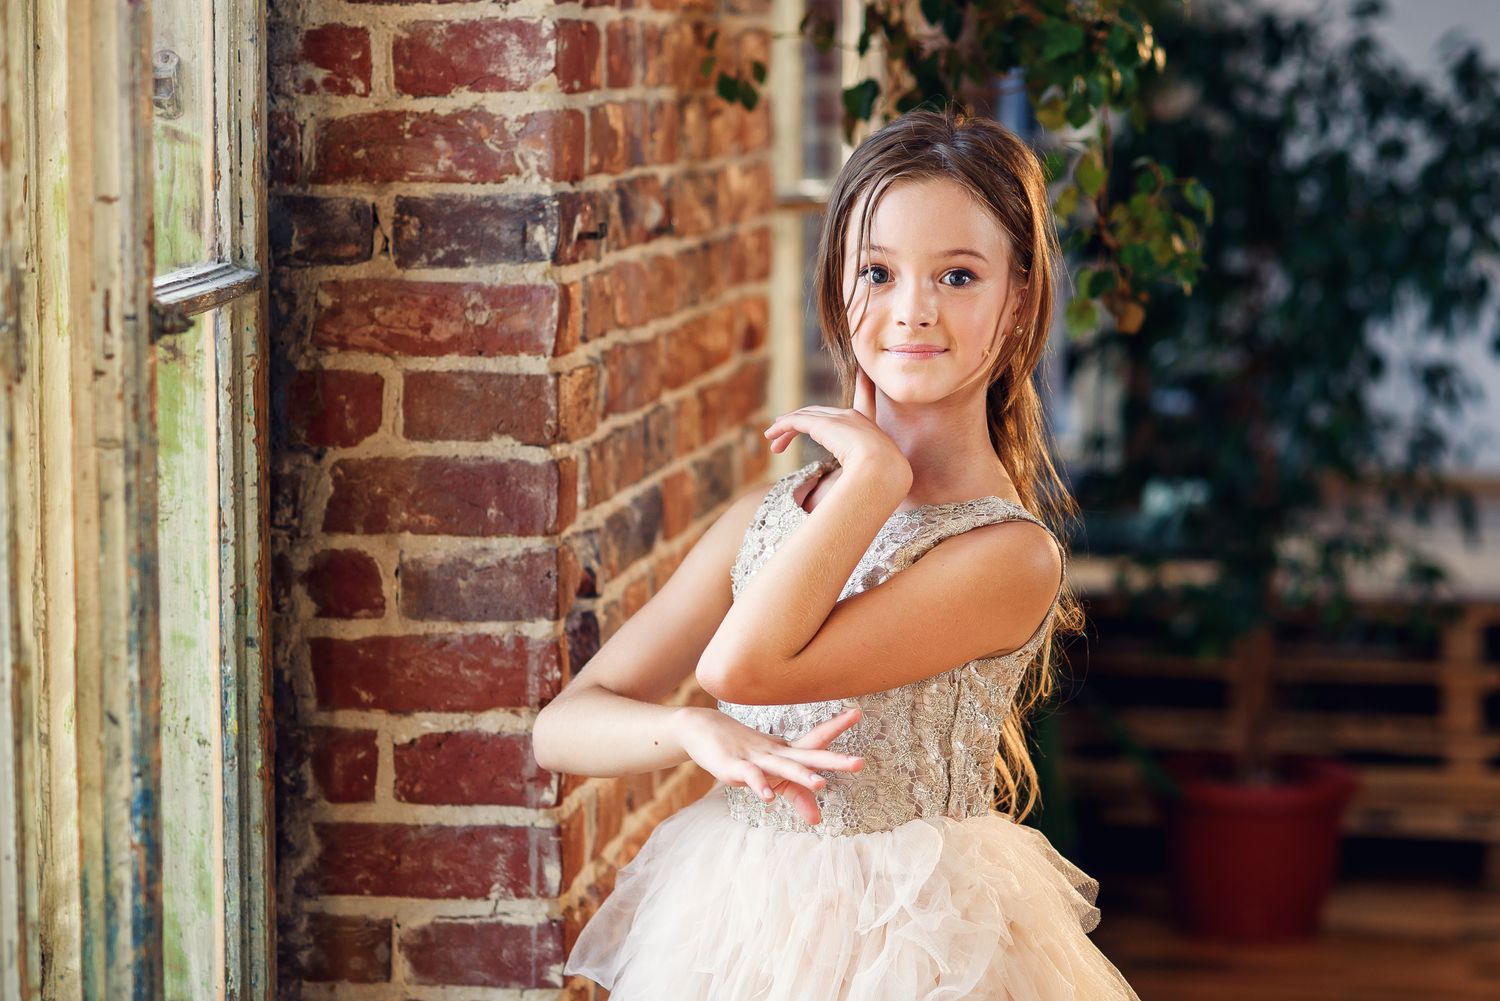 Young ballerina in tutu and pointe ballet shoes practicing dance moves in the dancing hall. Young girl in ballet dress at dance school.